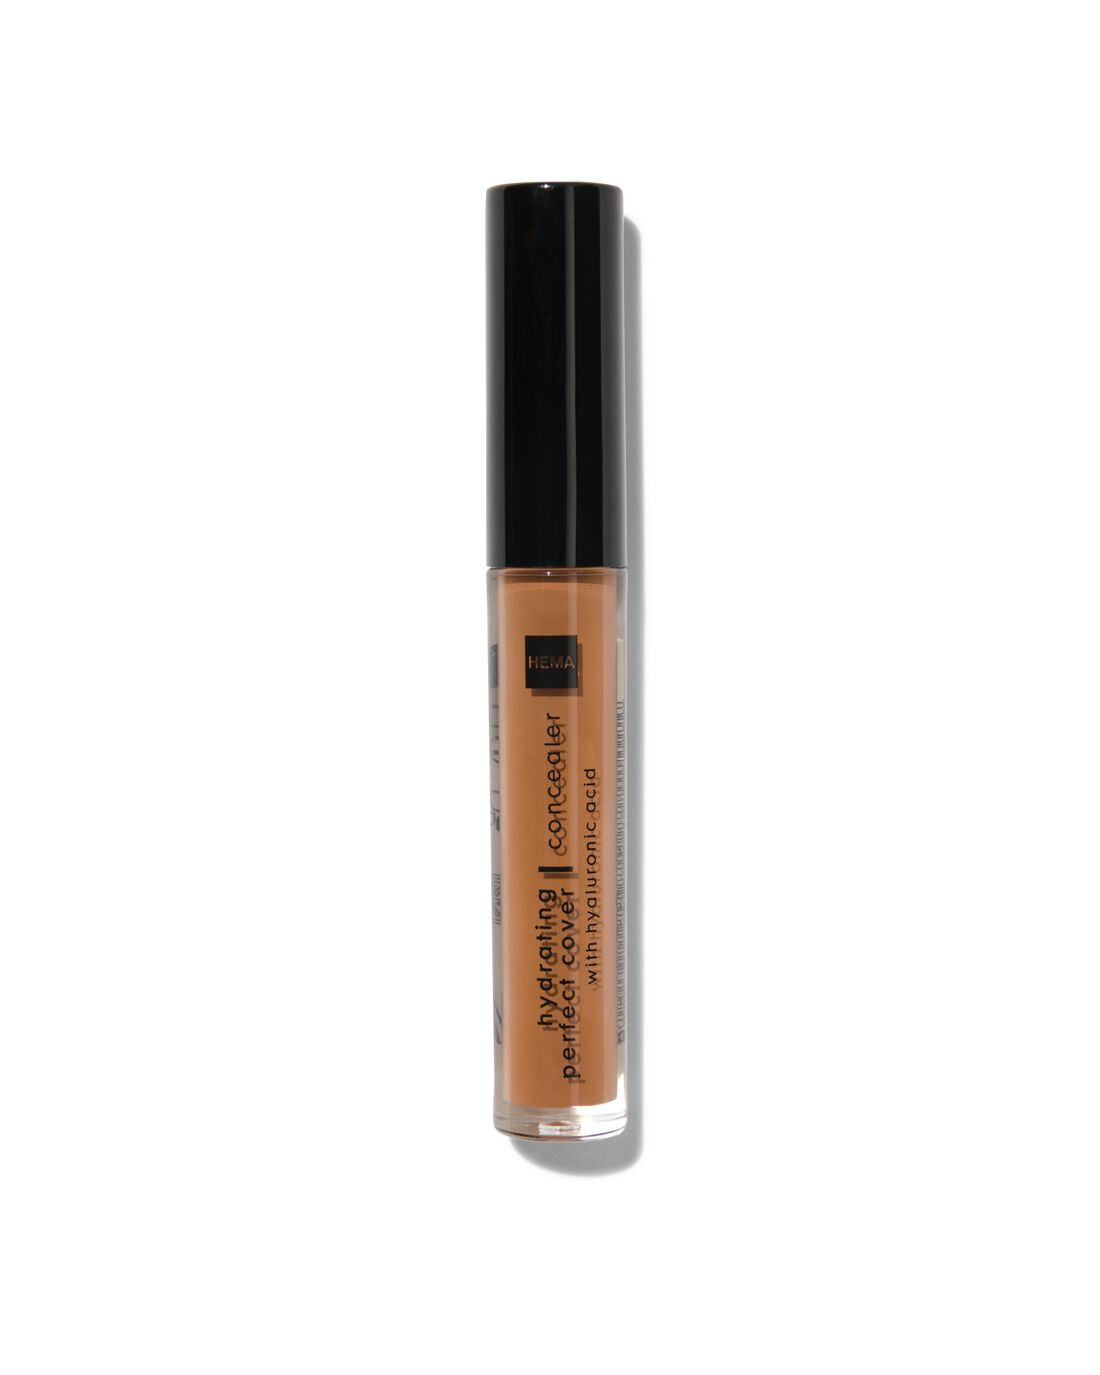 HEMA Hydrating Perfect Cover Concealer Toffee 05 (donkerbruin)